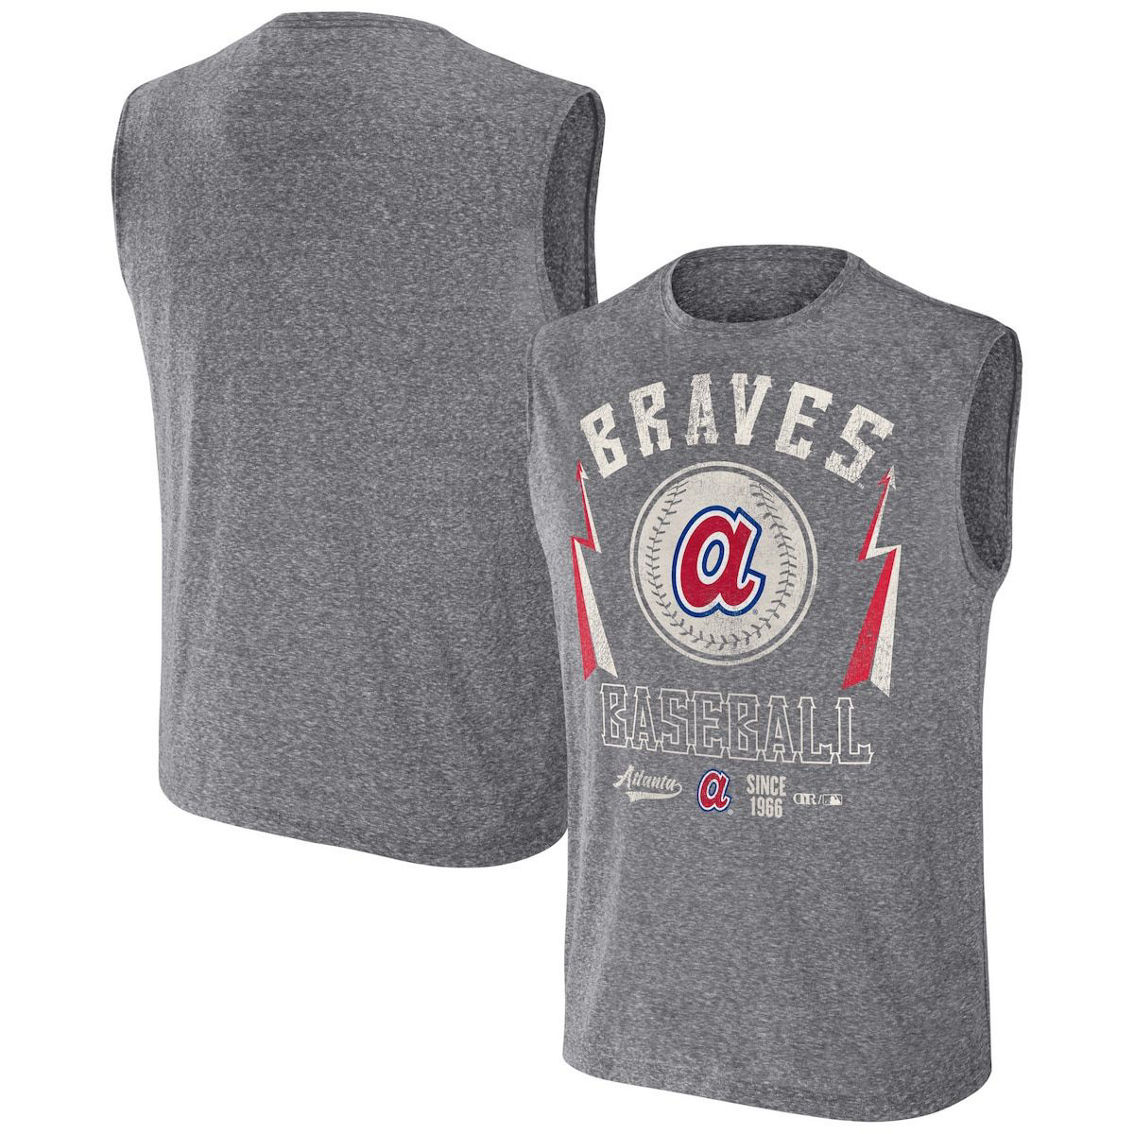 Darius Rucker Collection by Fanatics Men's Darius Rucker Collection by Fanatics Charcoal Atlanta Braves Muscle Tank Top - Image 2 of 4